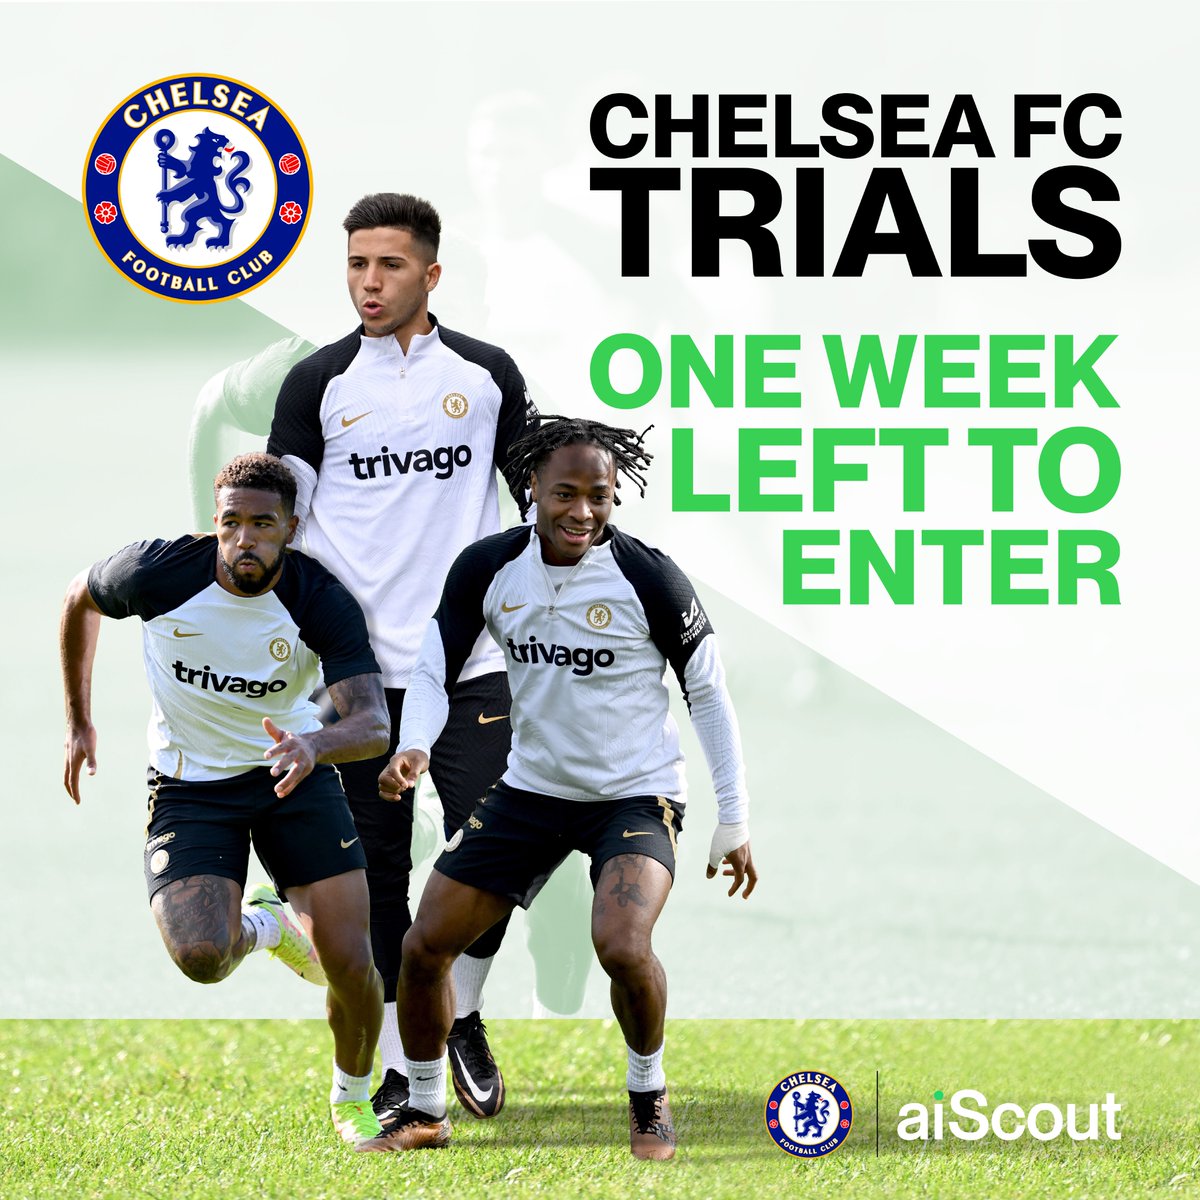 Just one week left to enter - don't miss out on your chance to trial for @ChelseaFC Download or open the aiScout app now!